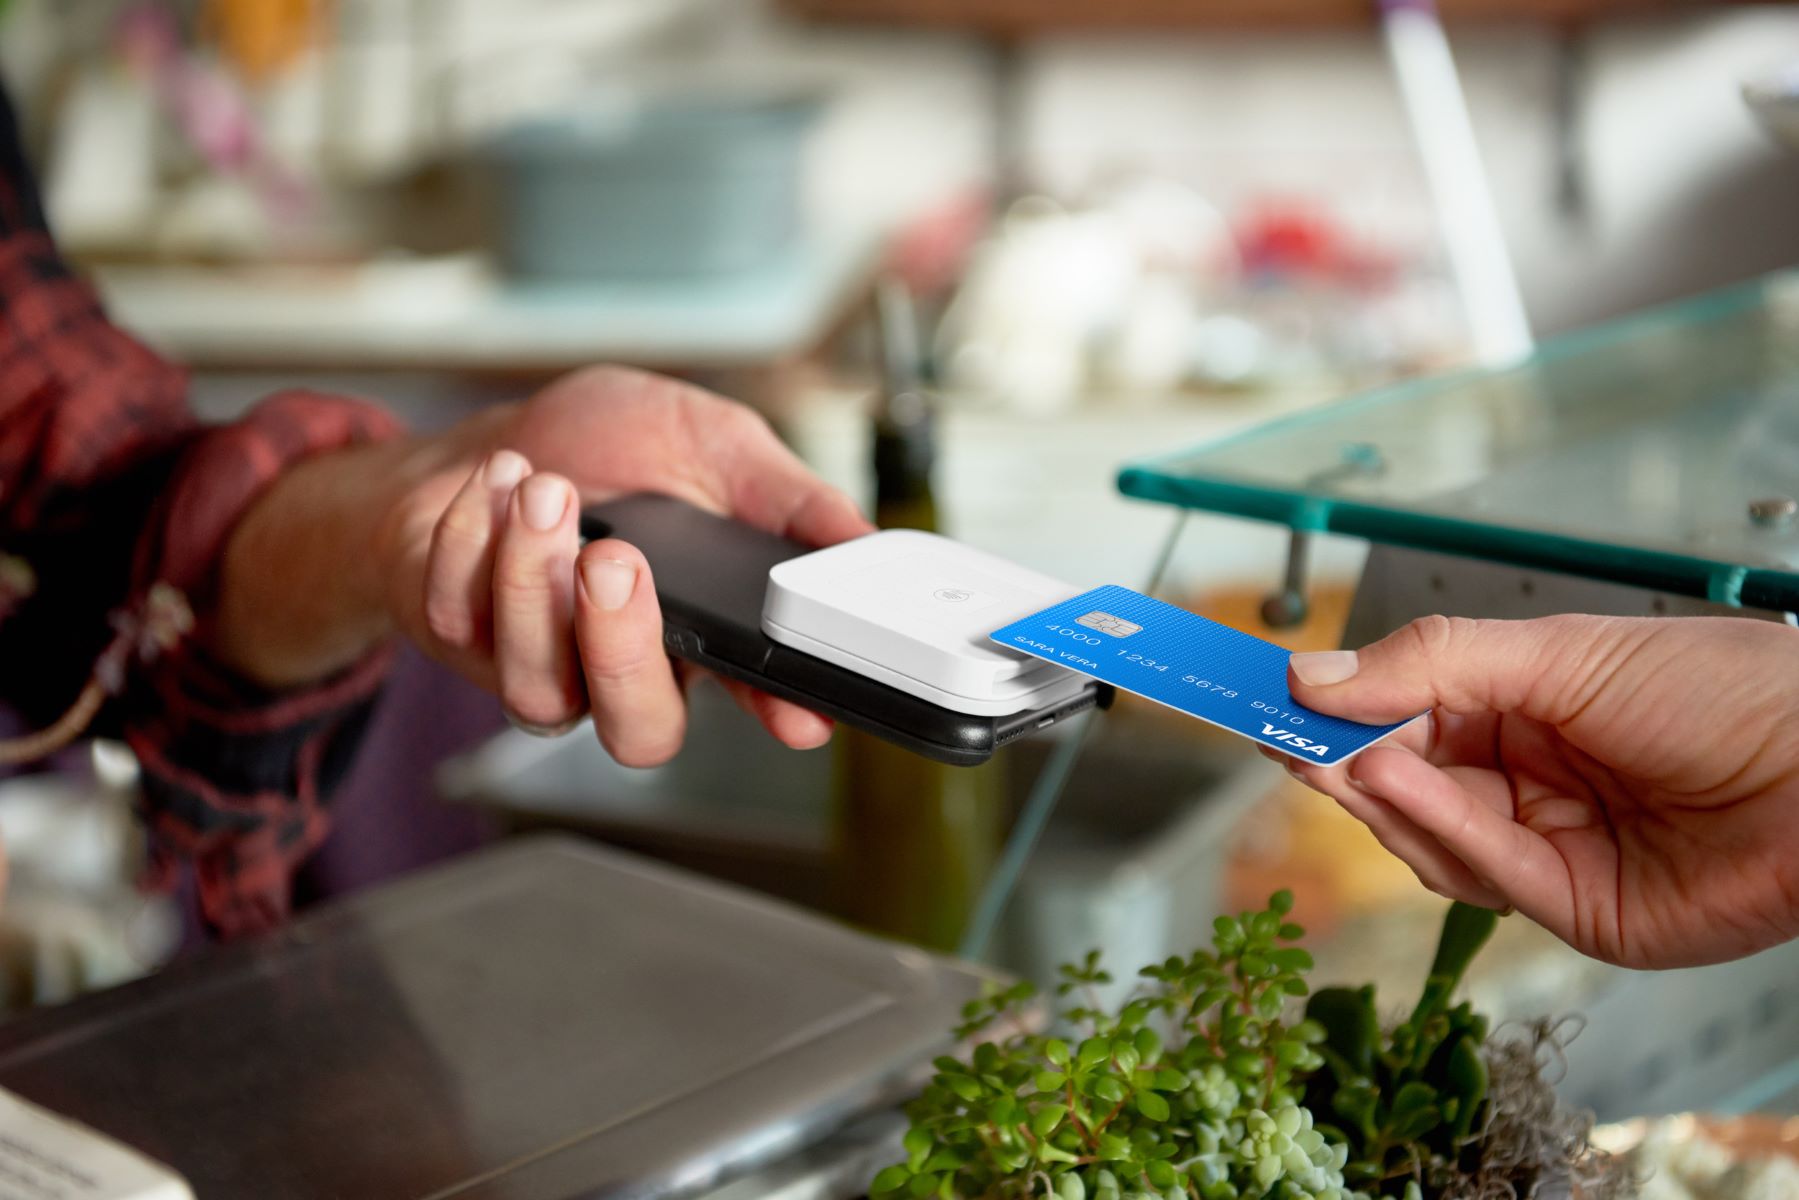 How To Use IPhone Credit Card Reader